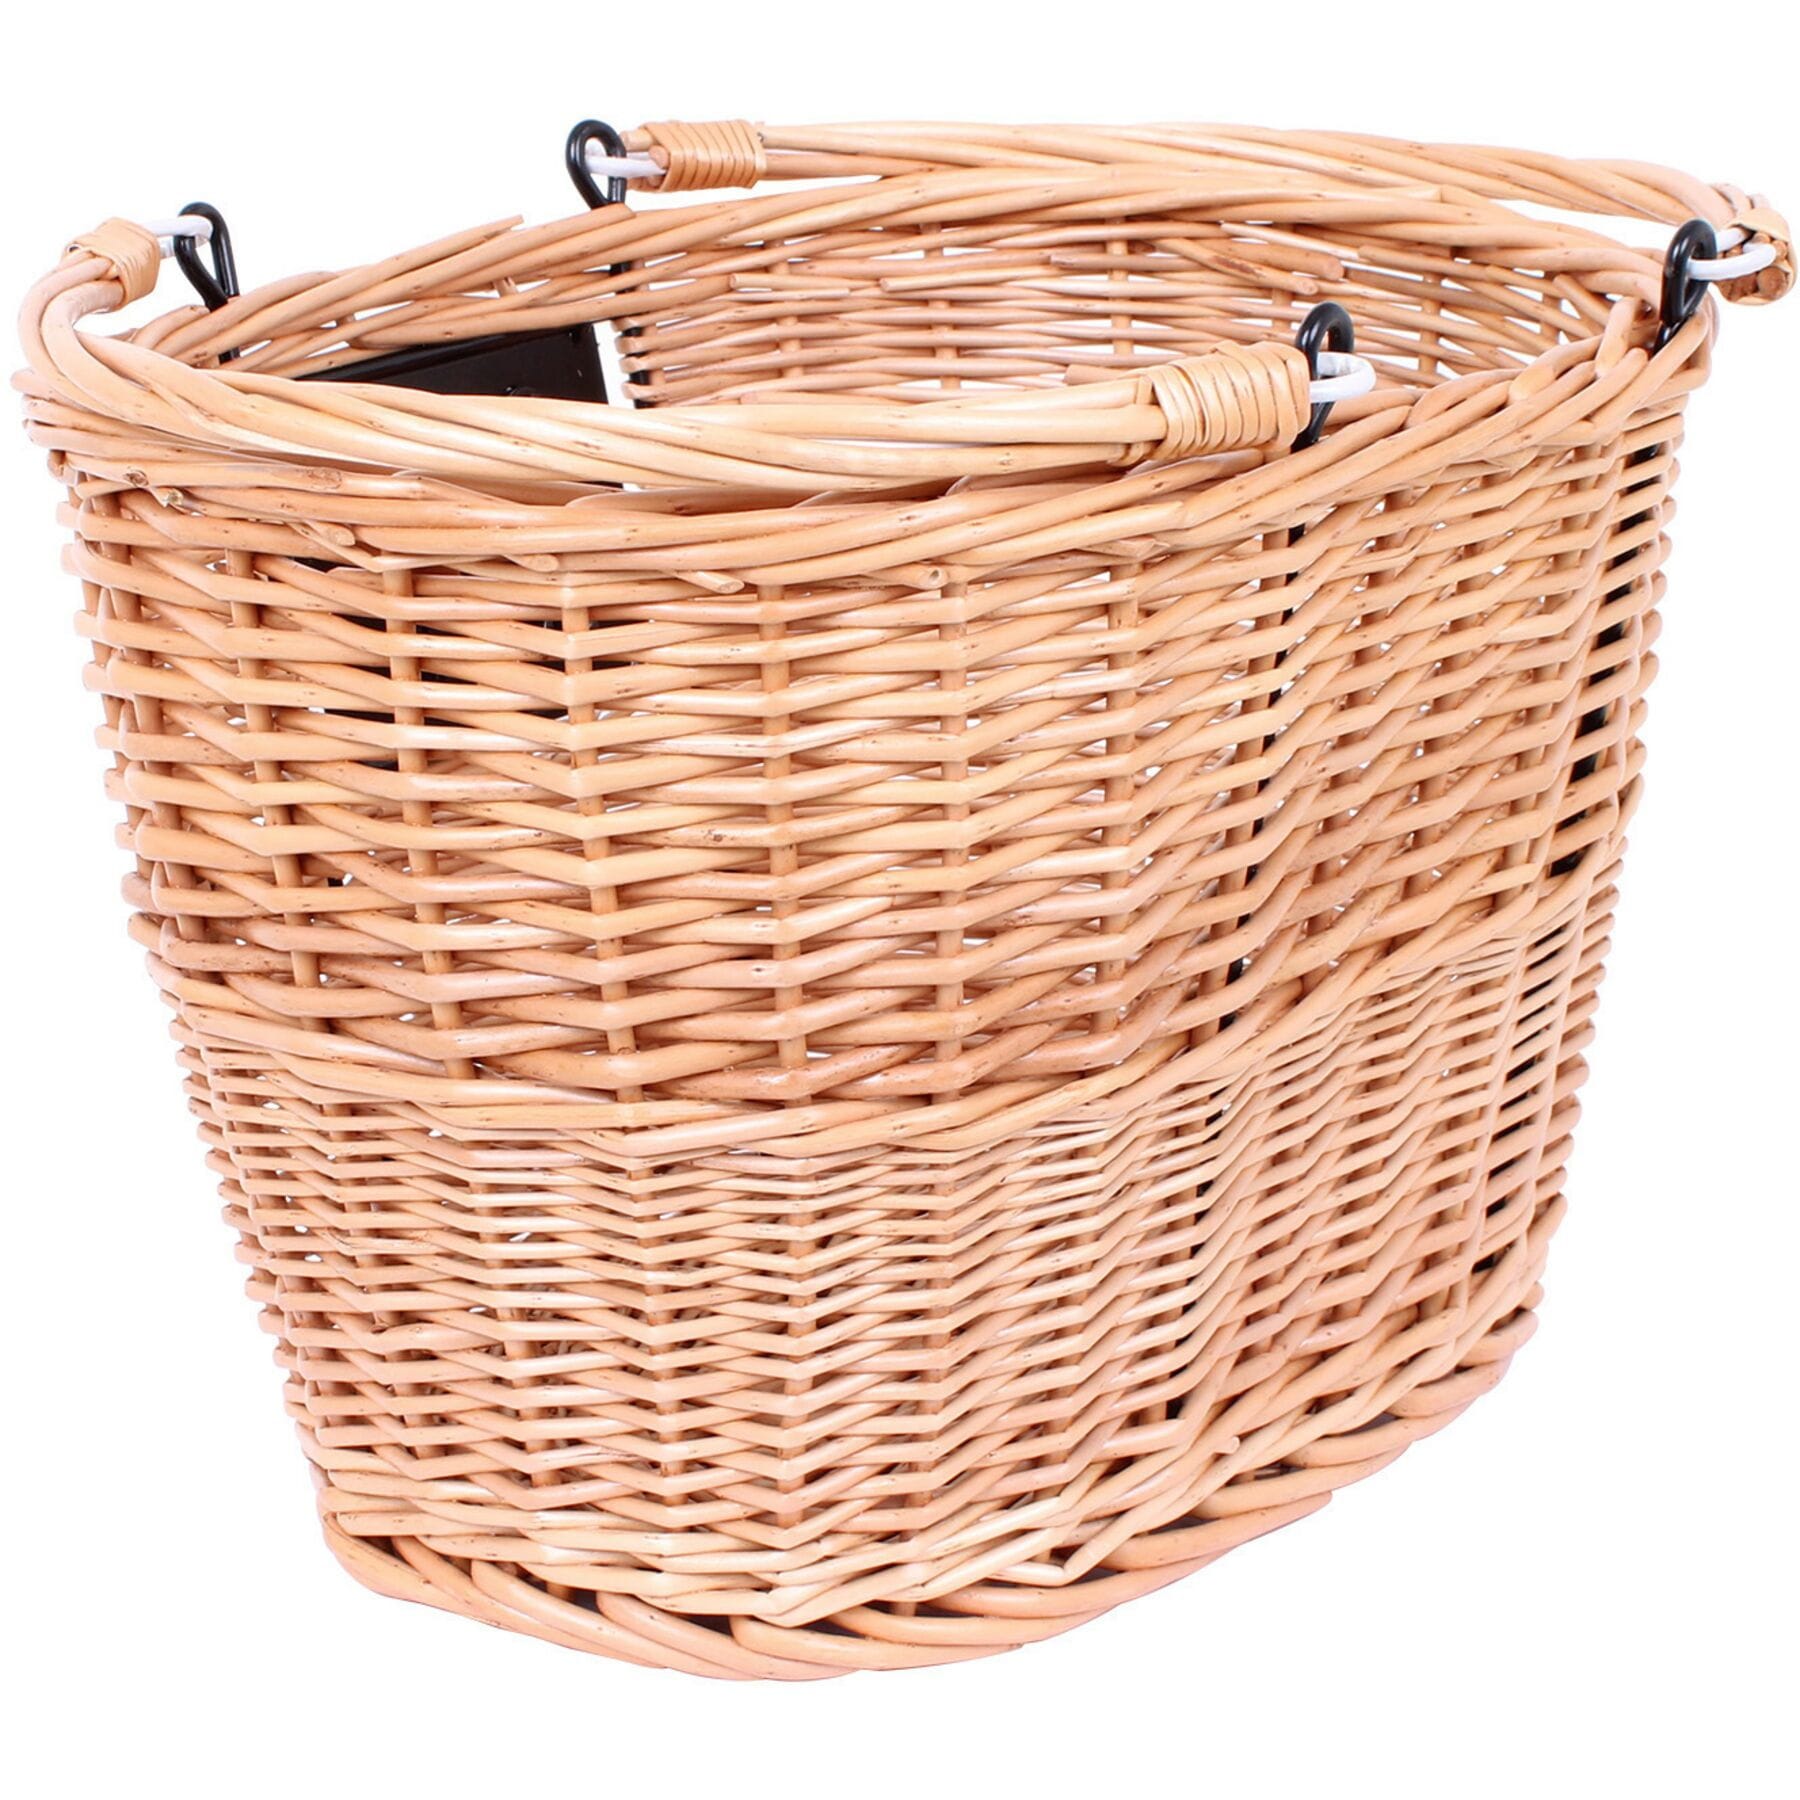 M Part Borough Oval Wicker Basket With Handles And Quick Release Bracket